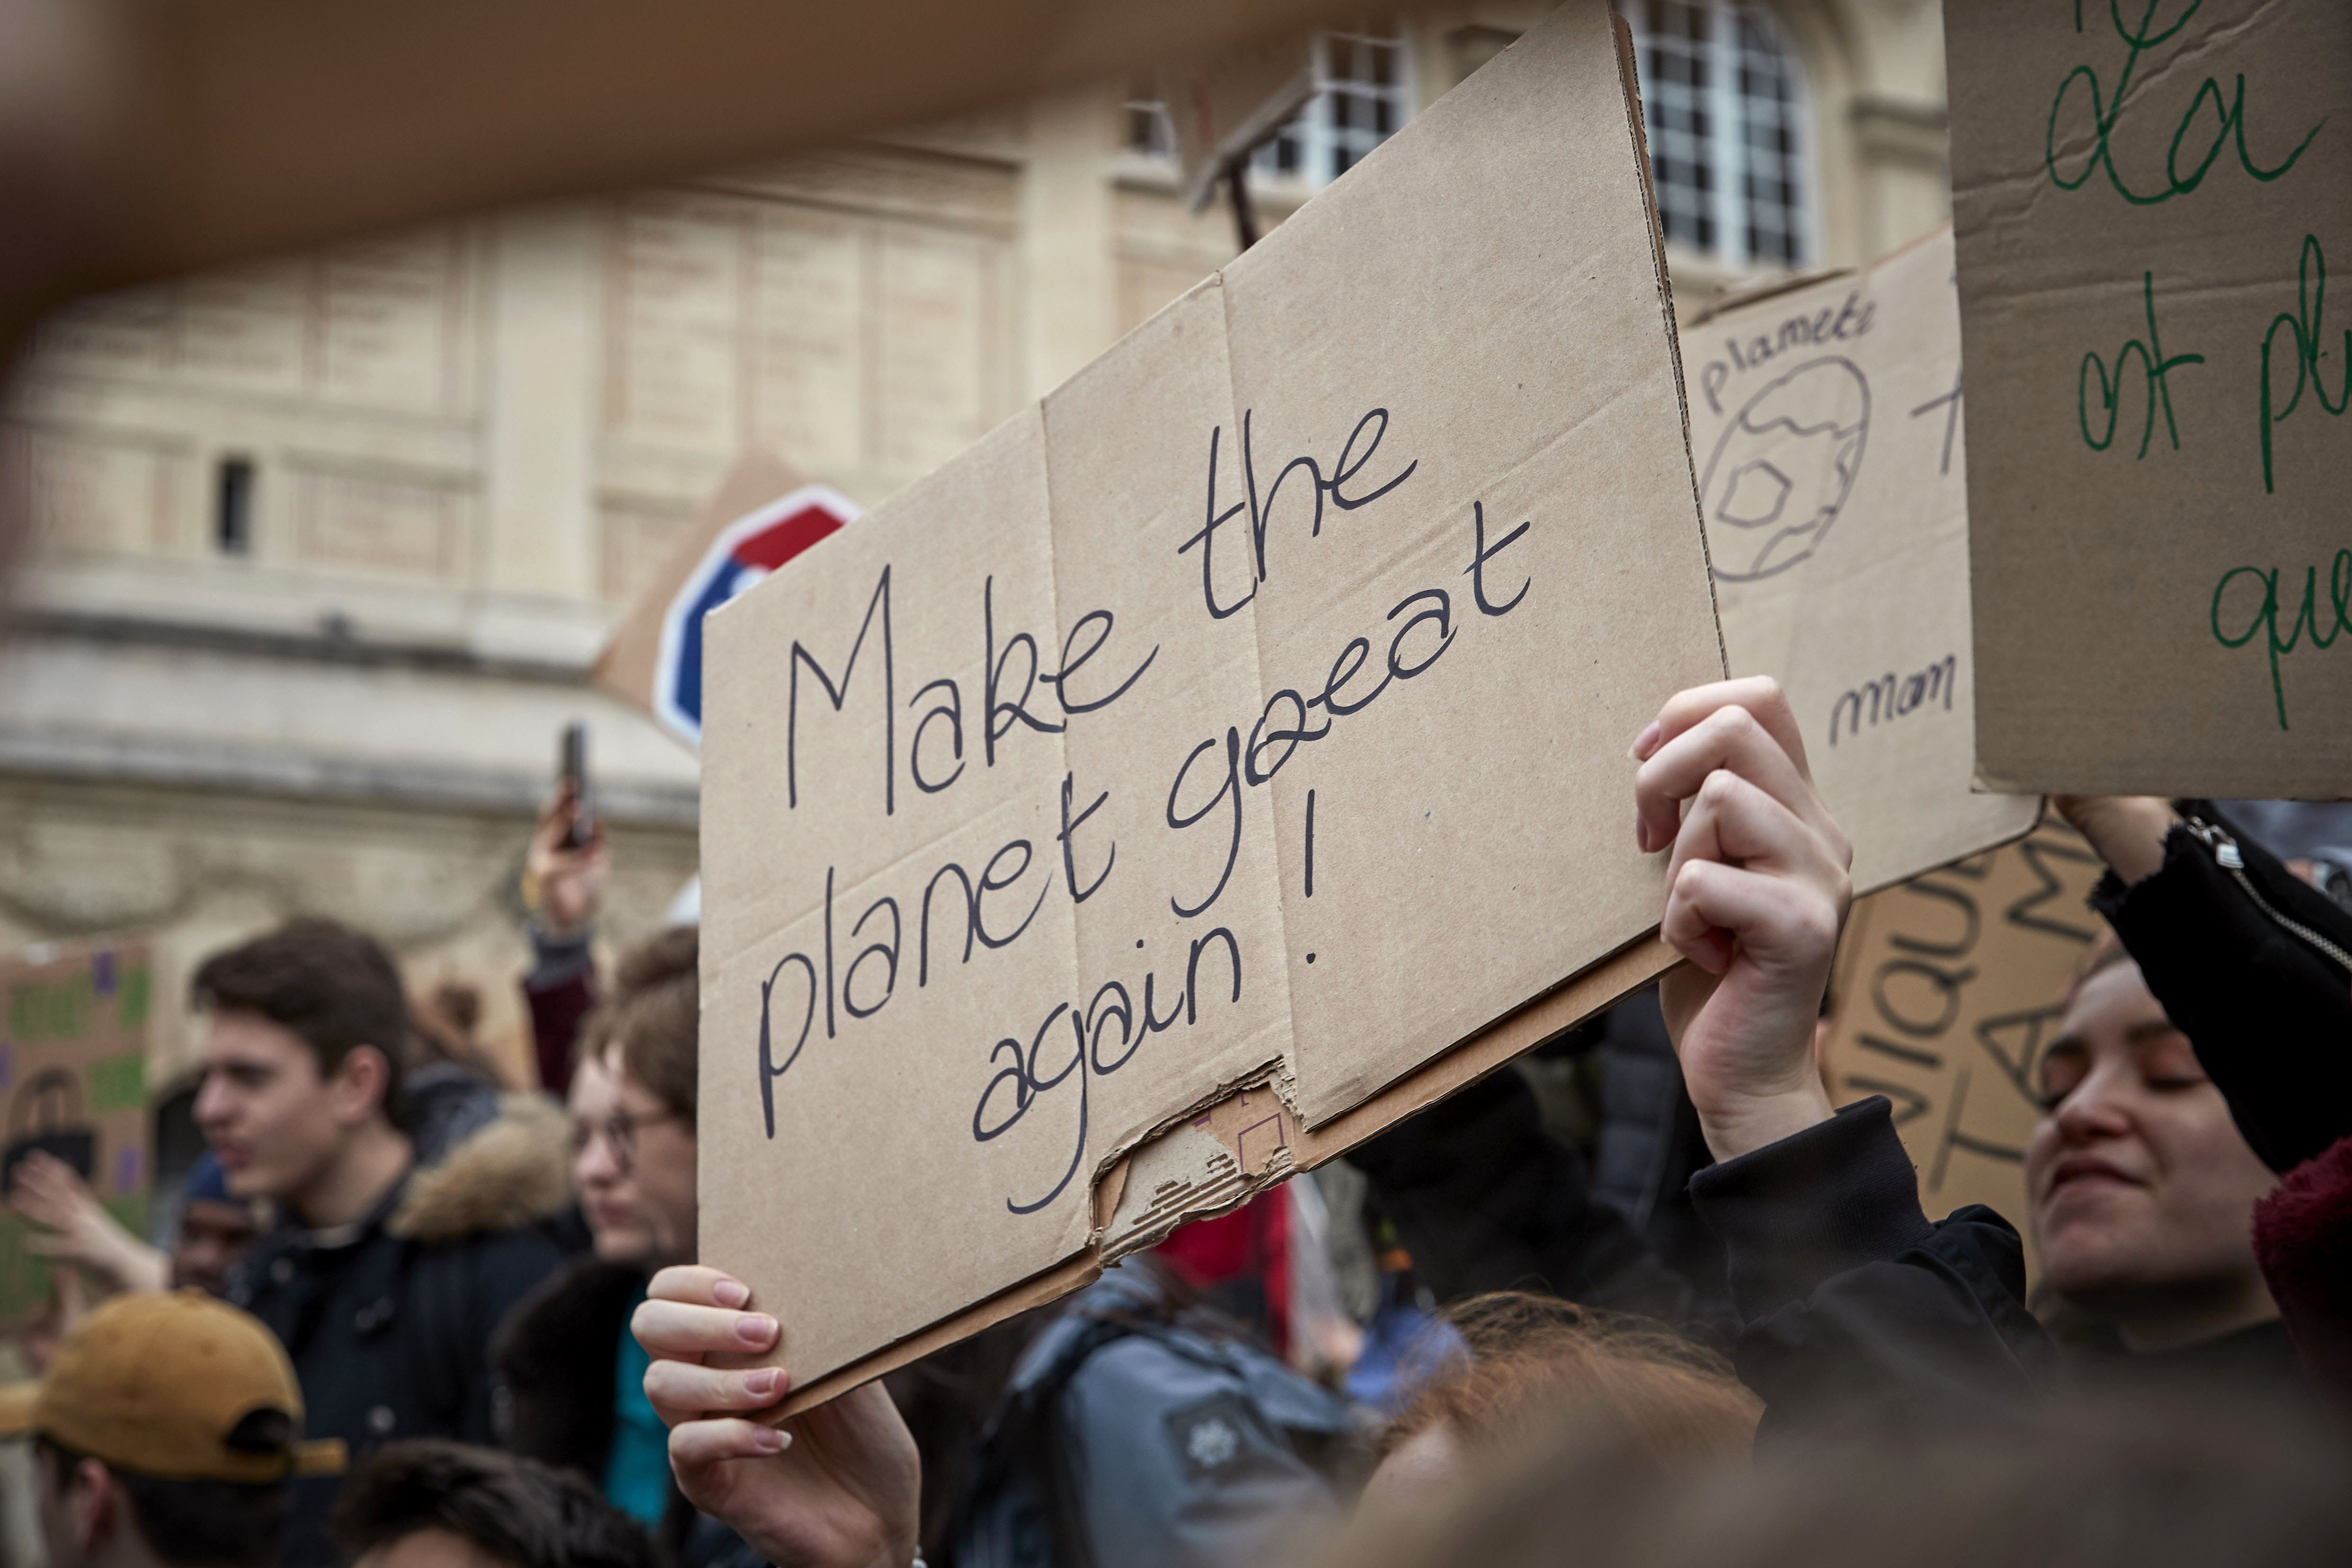 A placard being held during the Fridays for Future against climate change in Paris, France | Photo: Getty Images